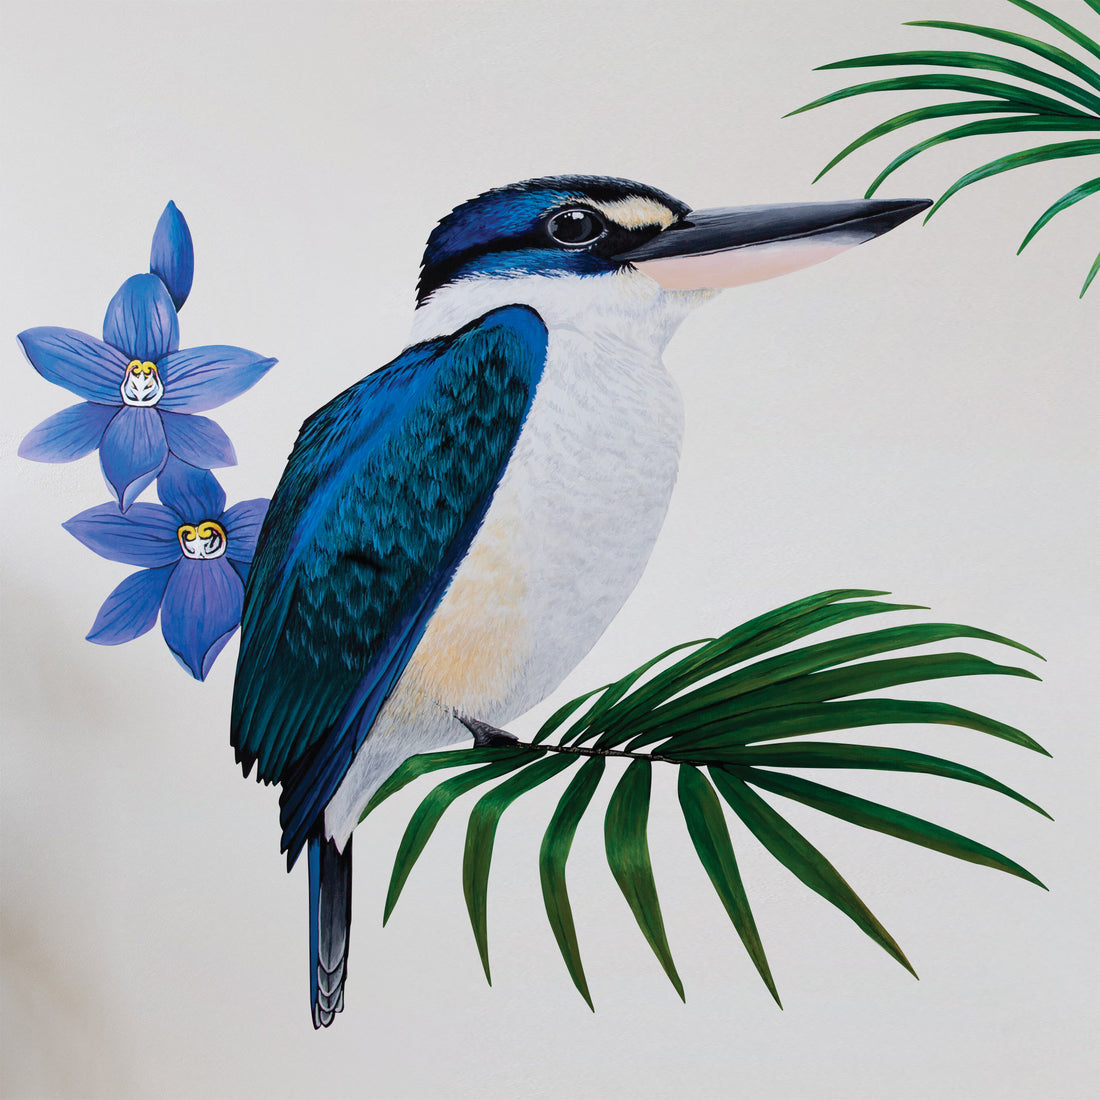 Kingfisher in Native Sun Orchids Wall Decal Your Decal Shop Wall Decal NZ